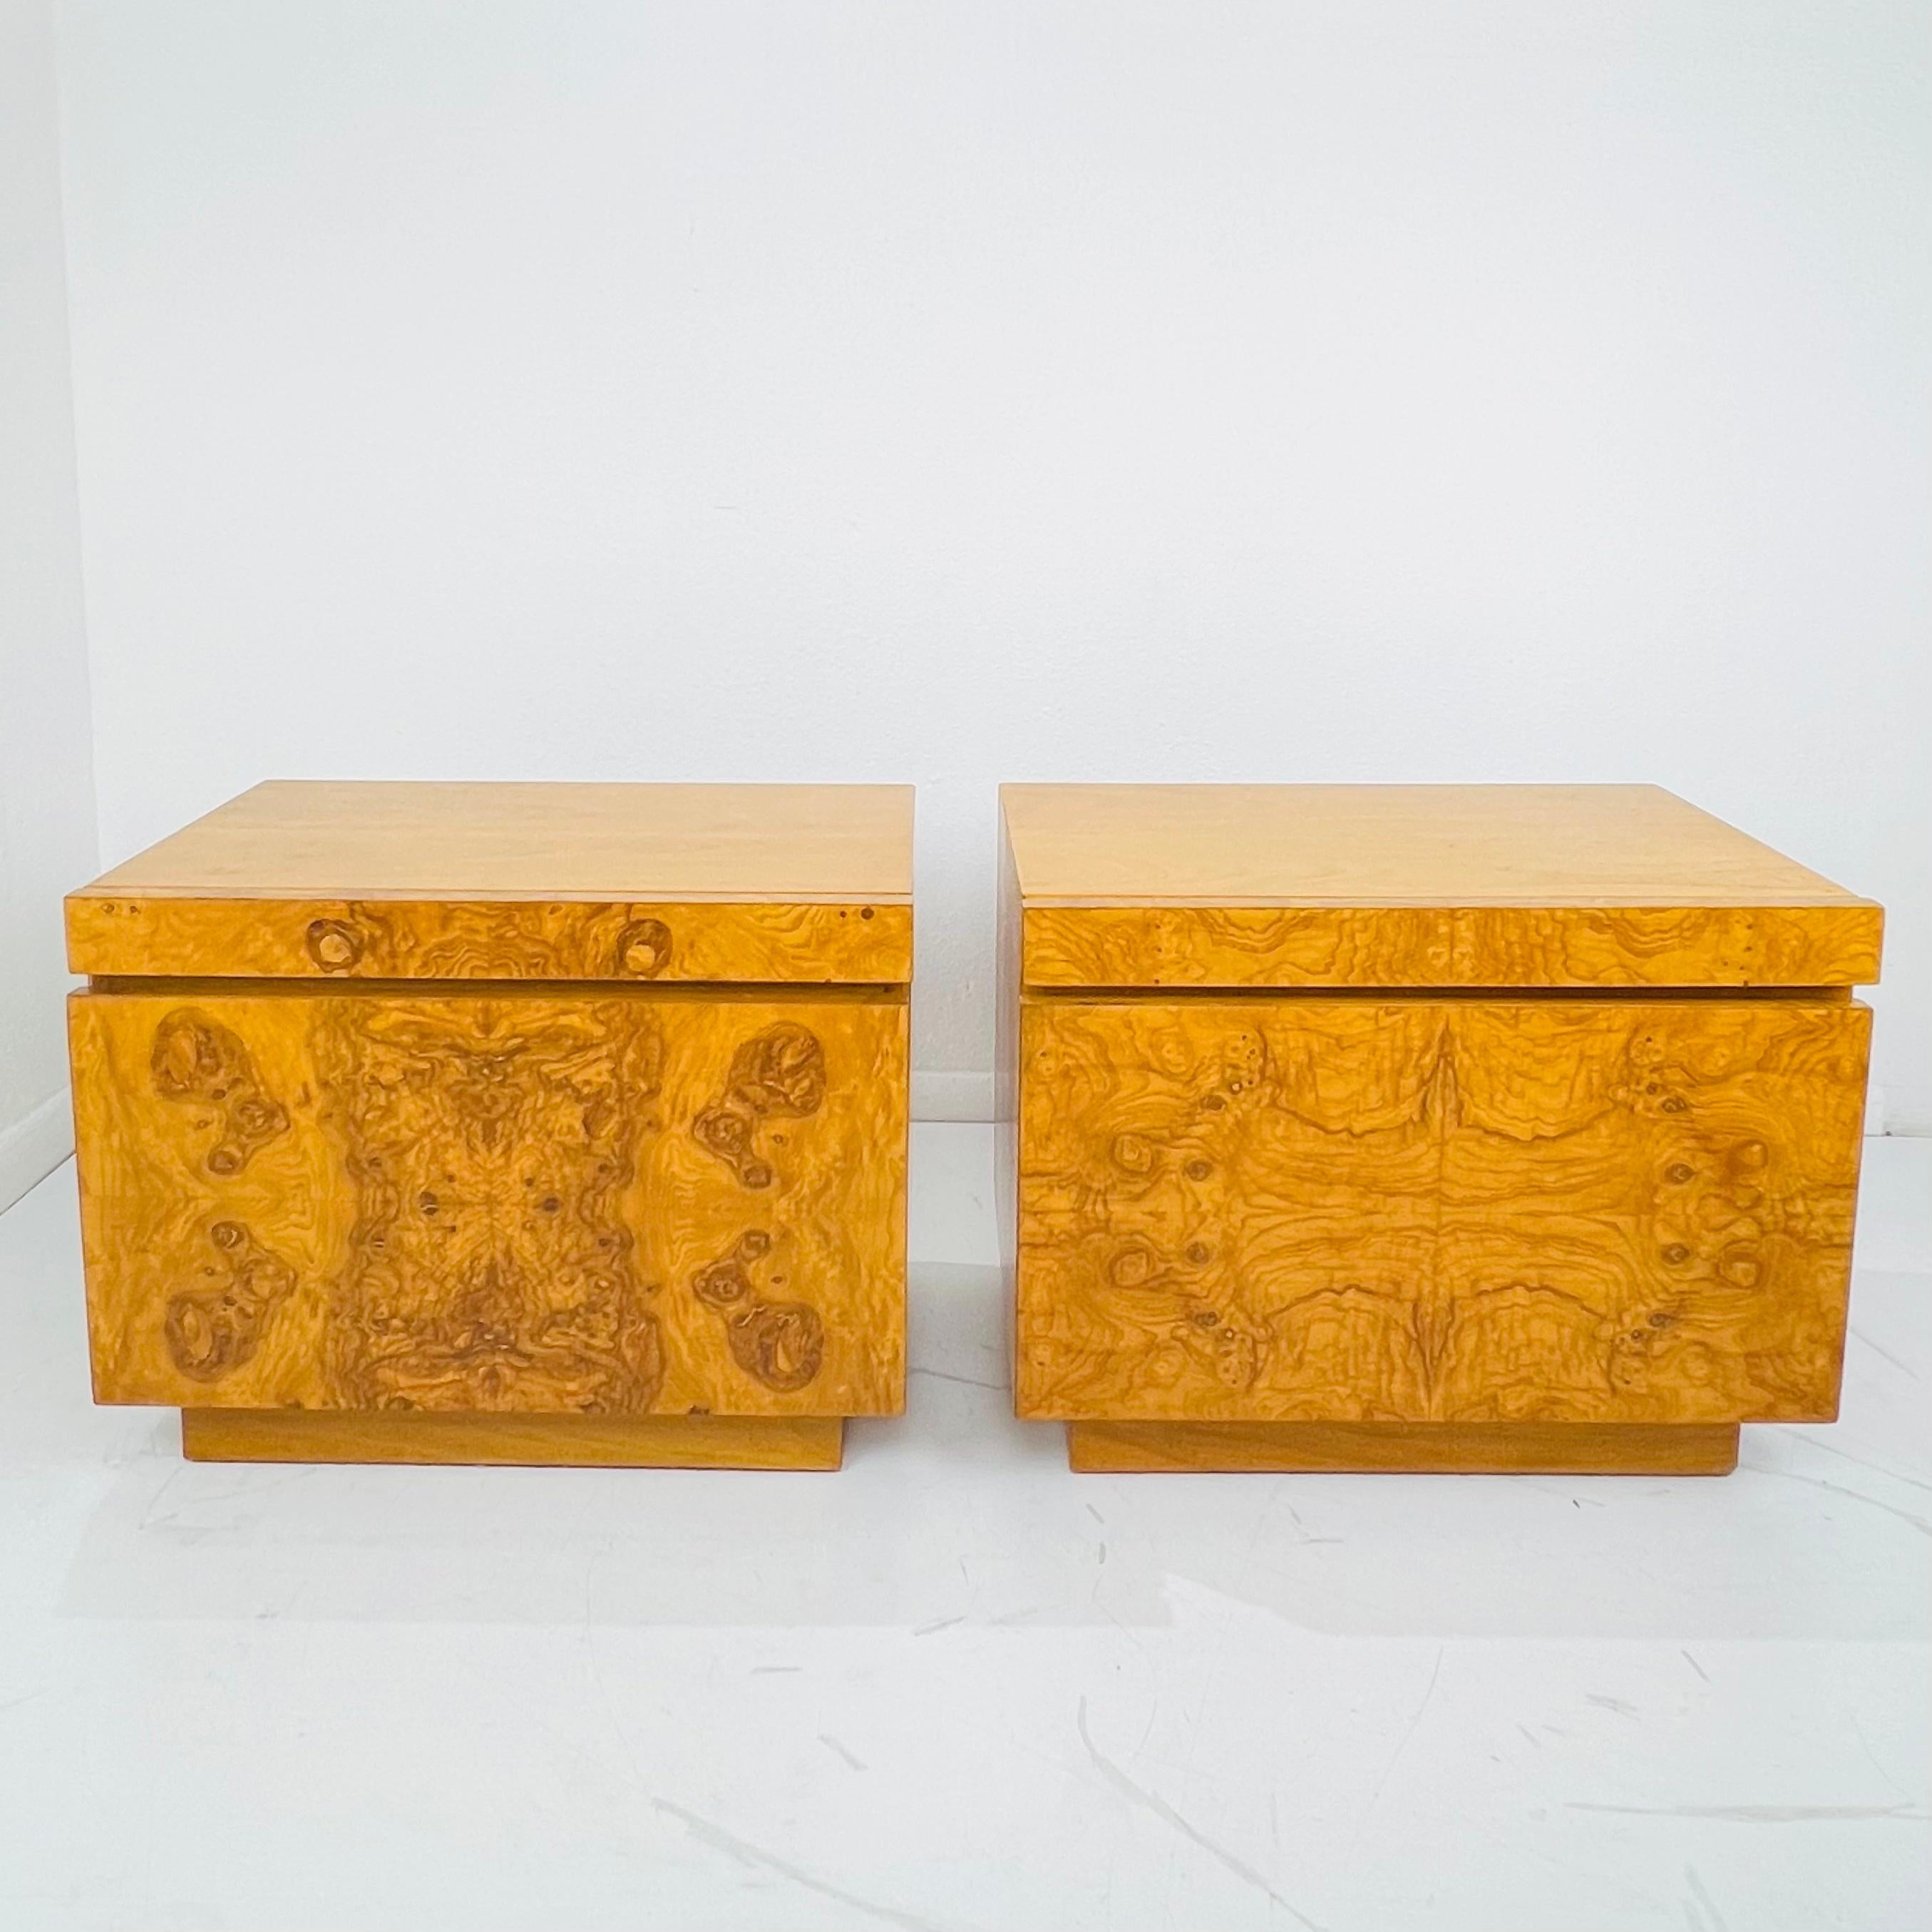 Stunning Vintage Mid-Century Modern pair of burl wood nightstands by Milo Baughman for Lane.

The timeless beauty of burl wood, a naturally occurring wood pattern, and clean modernist lines make these nightstands a standout. The bedside tables